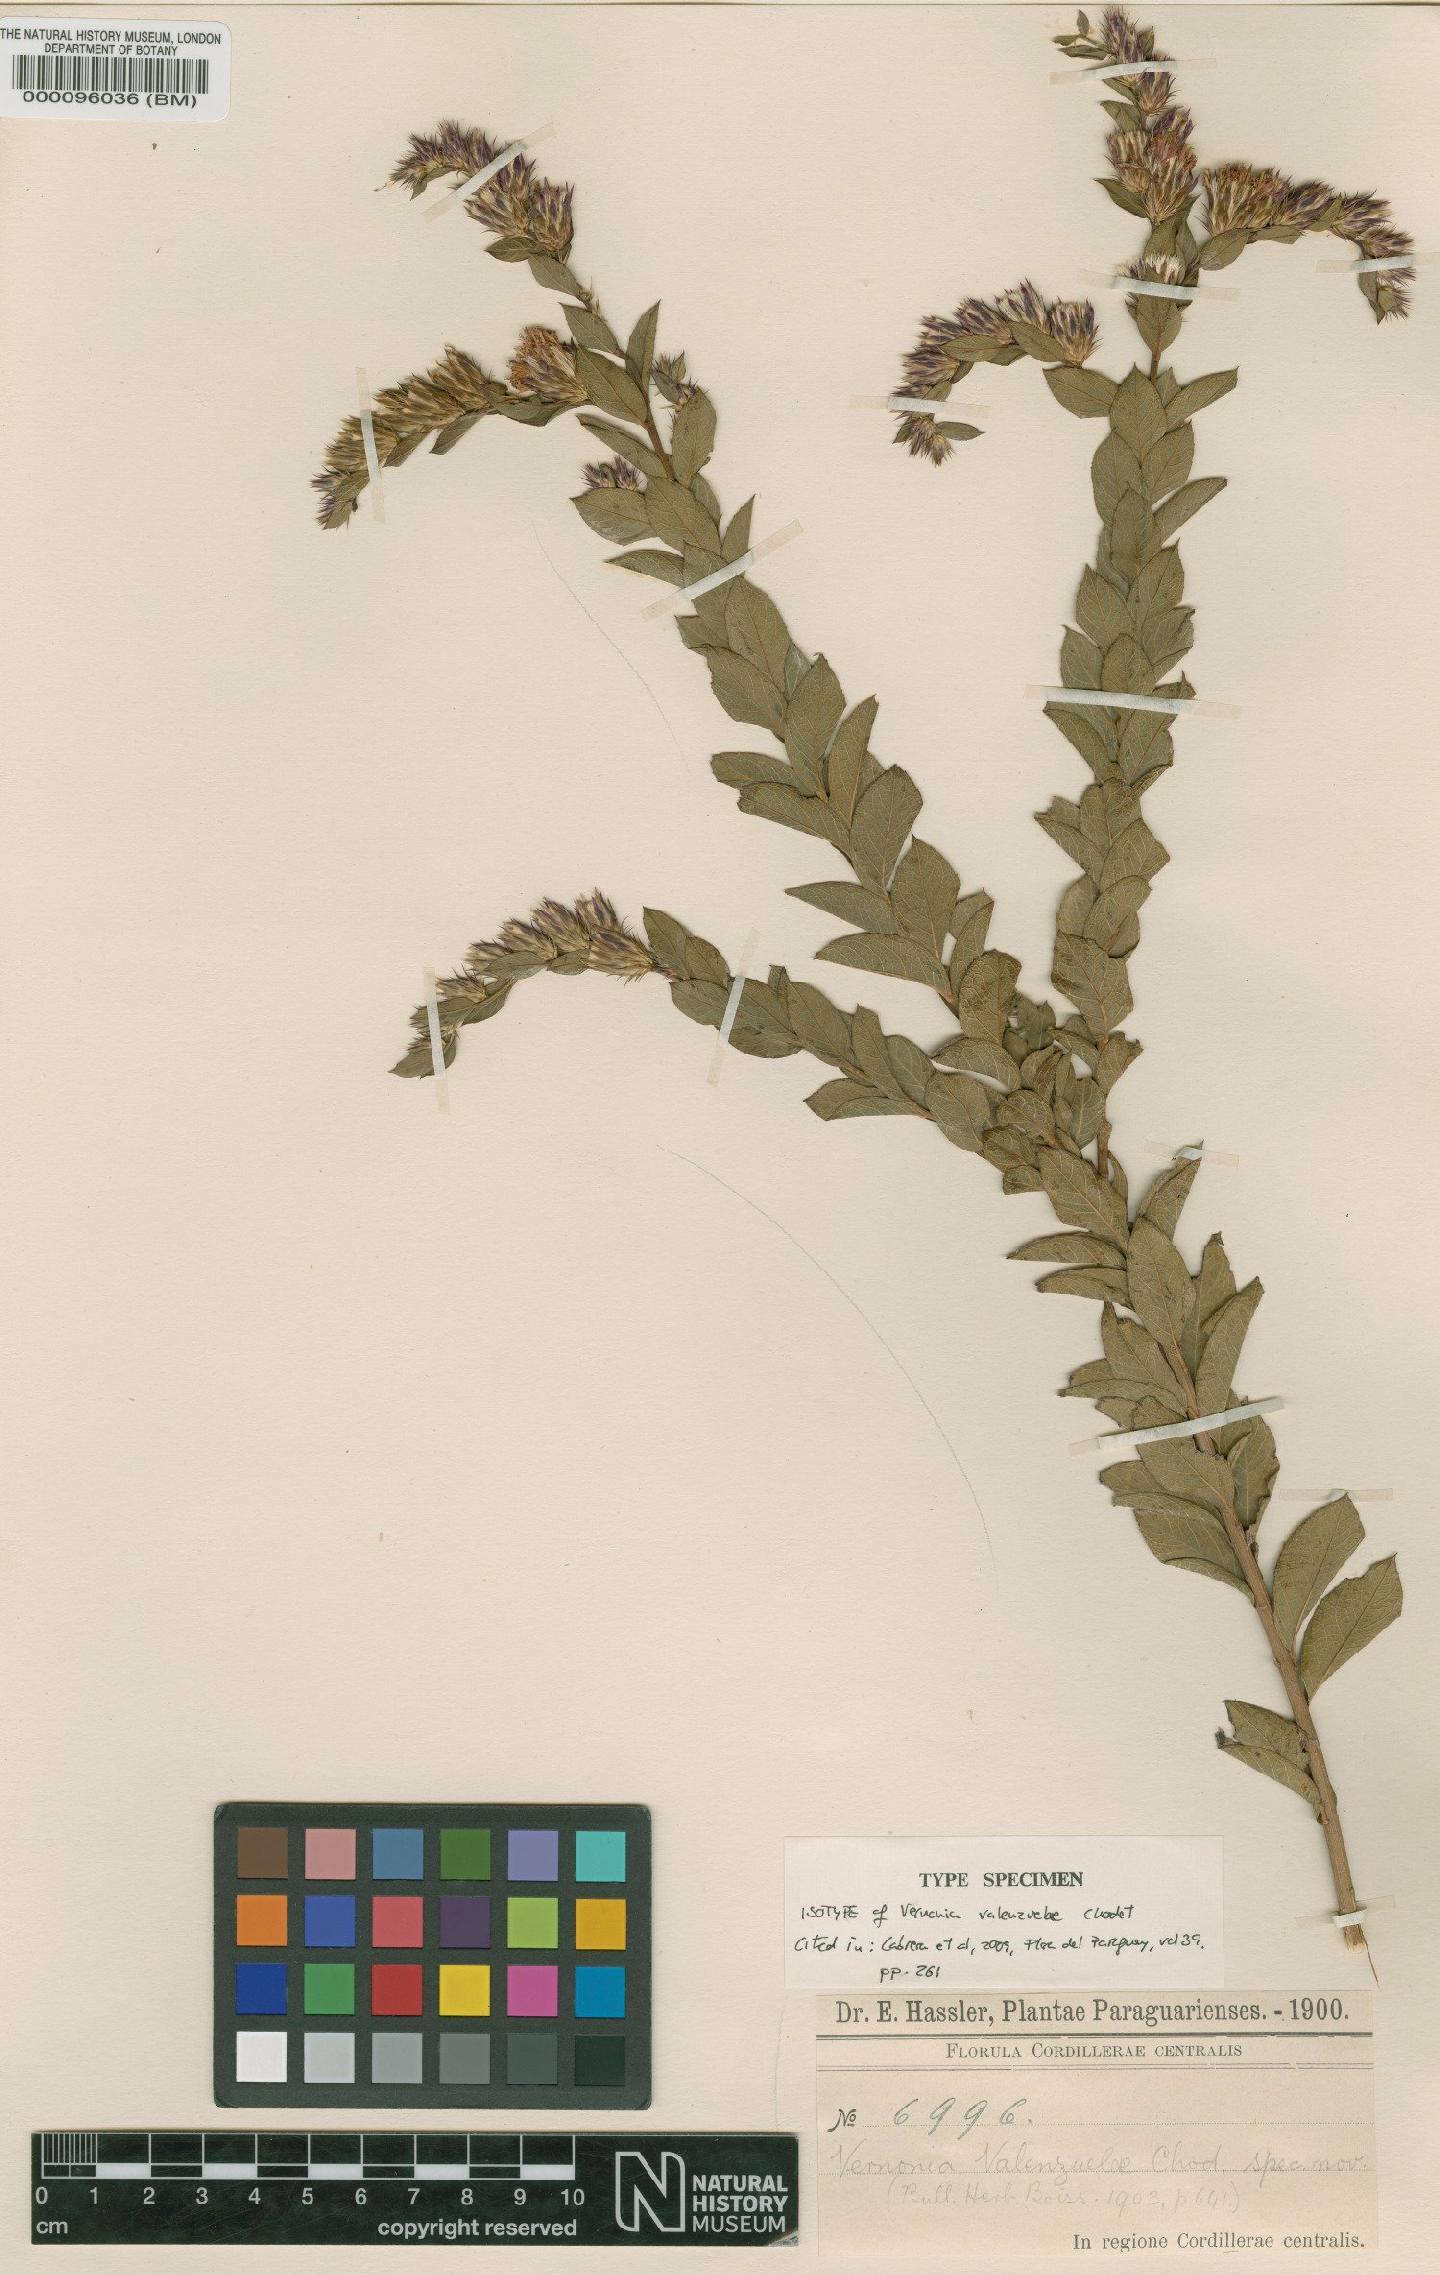 To NHMUK collection (Vernonia valenzuelae Chodat; Isotype; NHMUK:ecatalogue:4567633)